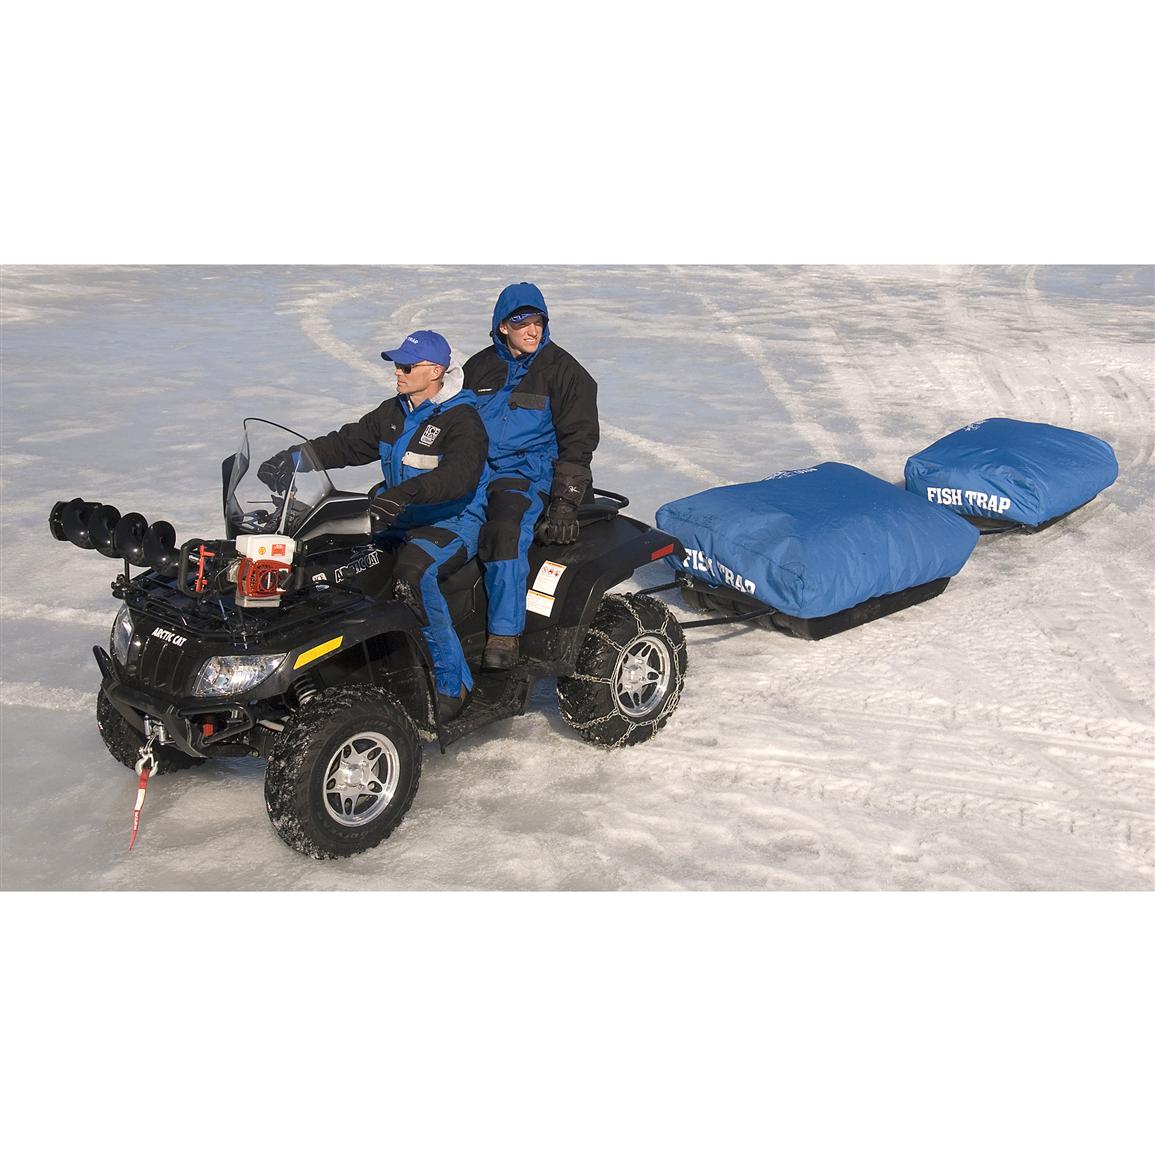 Shappell Ice Fishing Jet Sled XL - 669915, Ice Fishing Sleds at Sportsman's  Guide